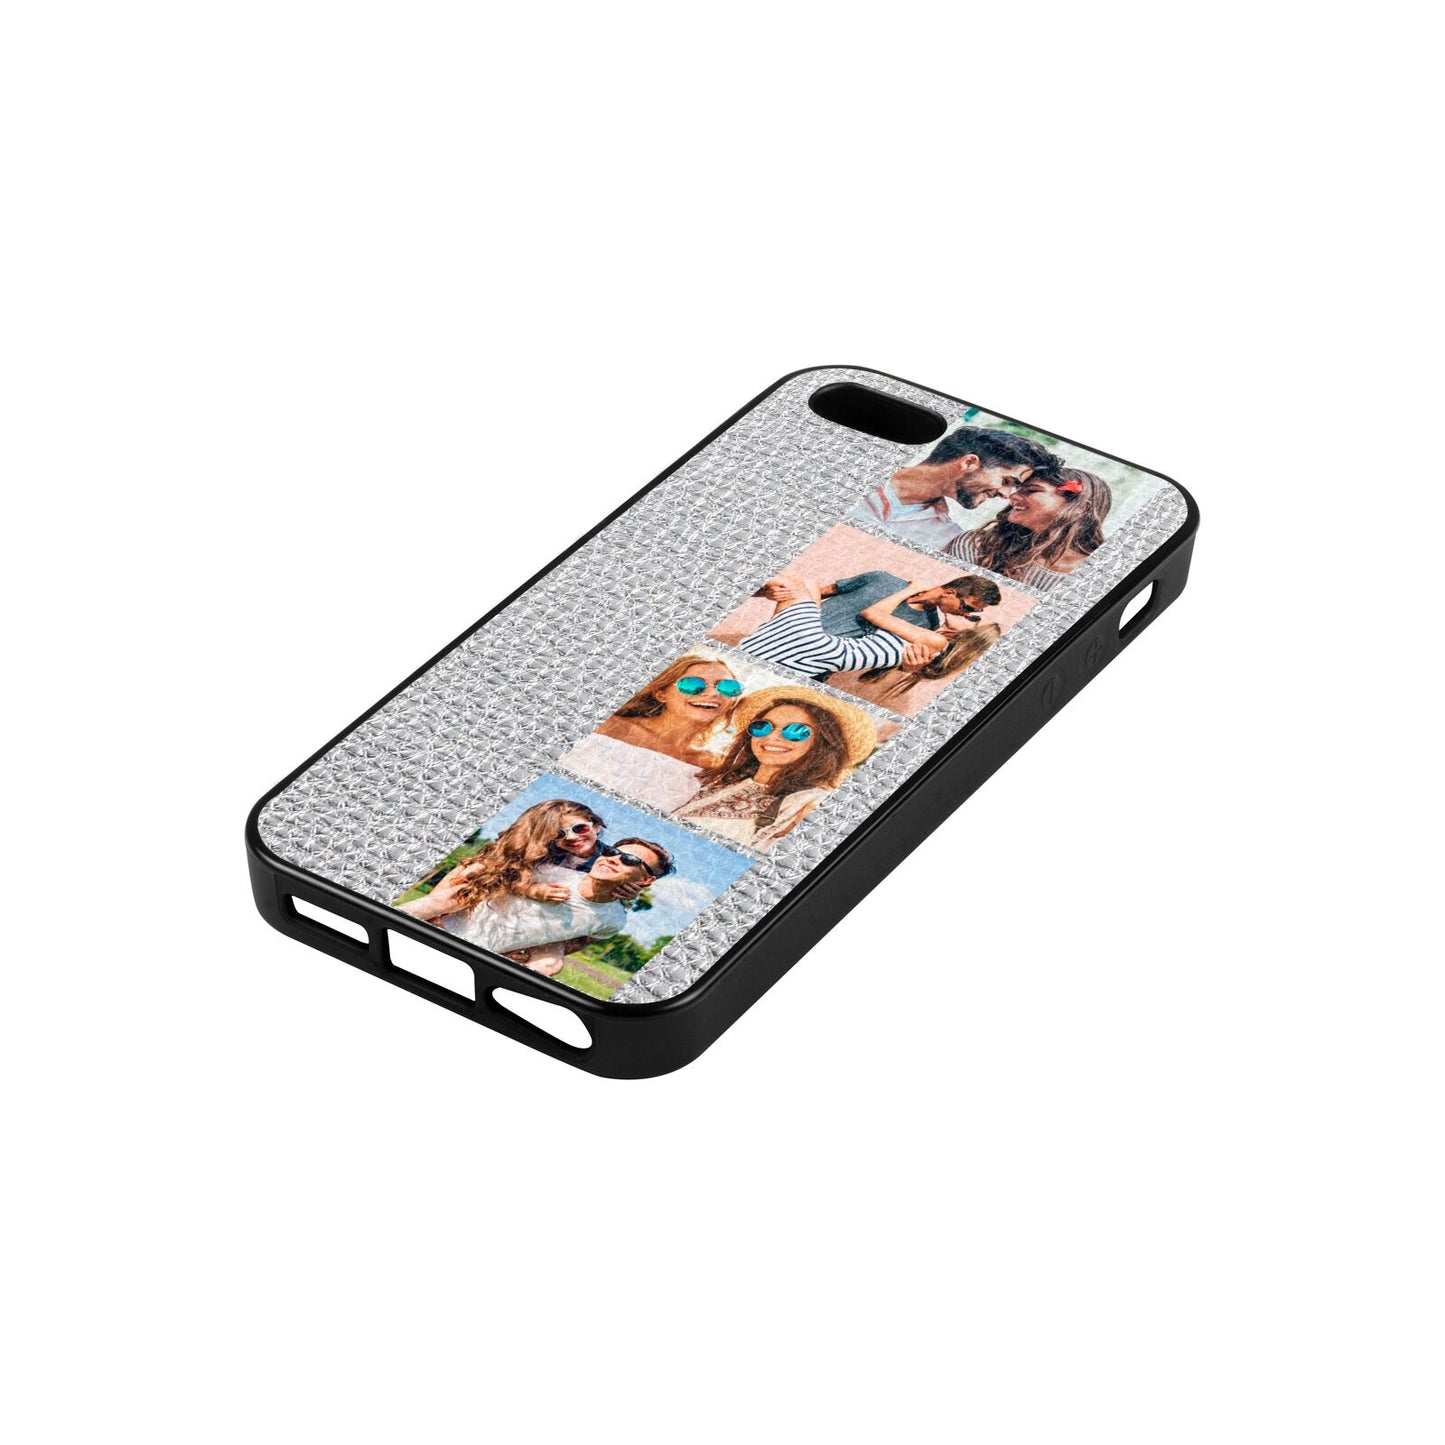 Photo Strip Montage Upload Silver Pebble Leather iPhone 5 Case Side Angle